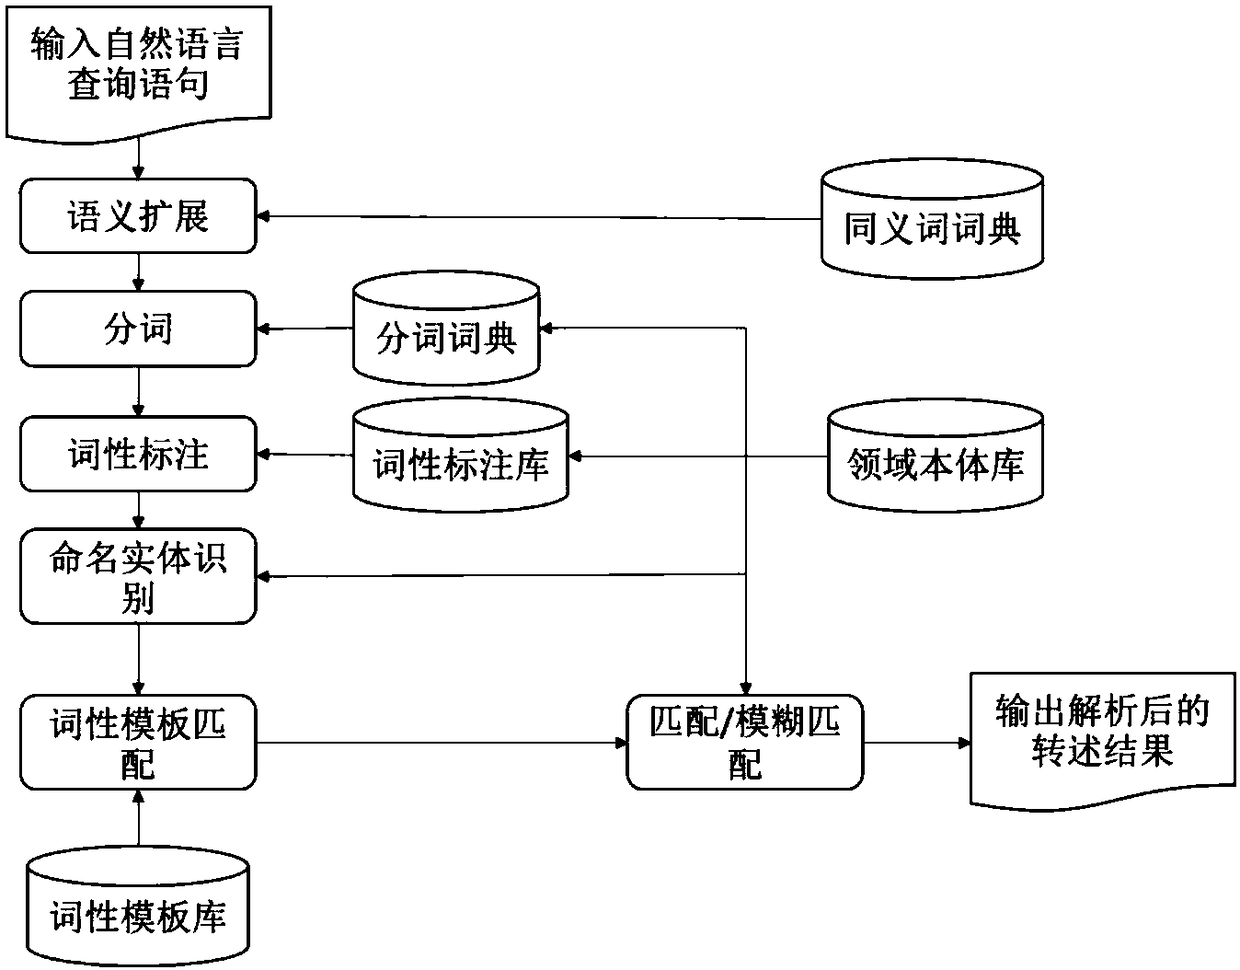 System for achieving Chinese near-natural language query interfaces